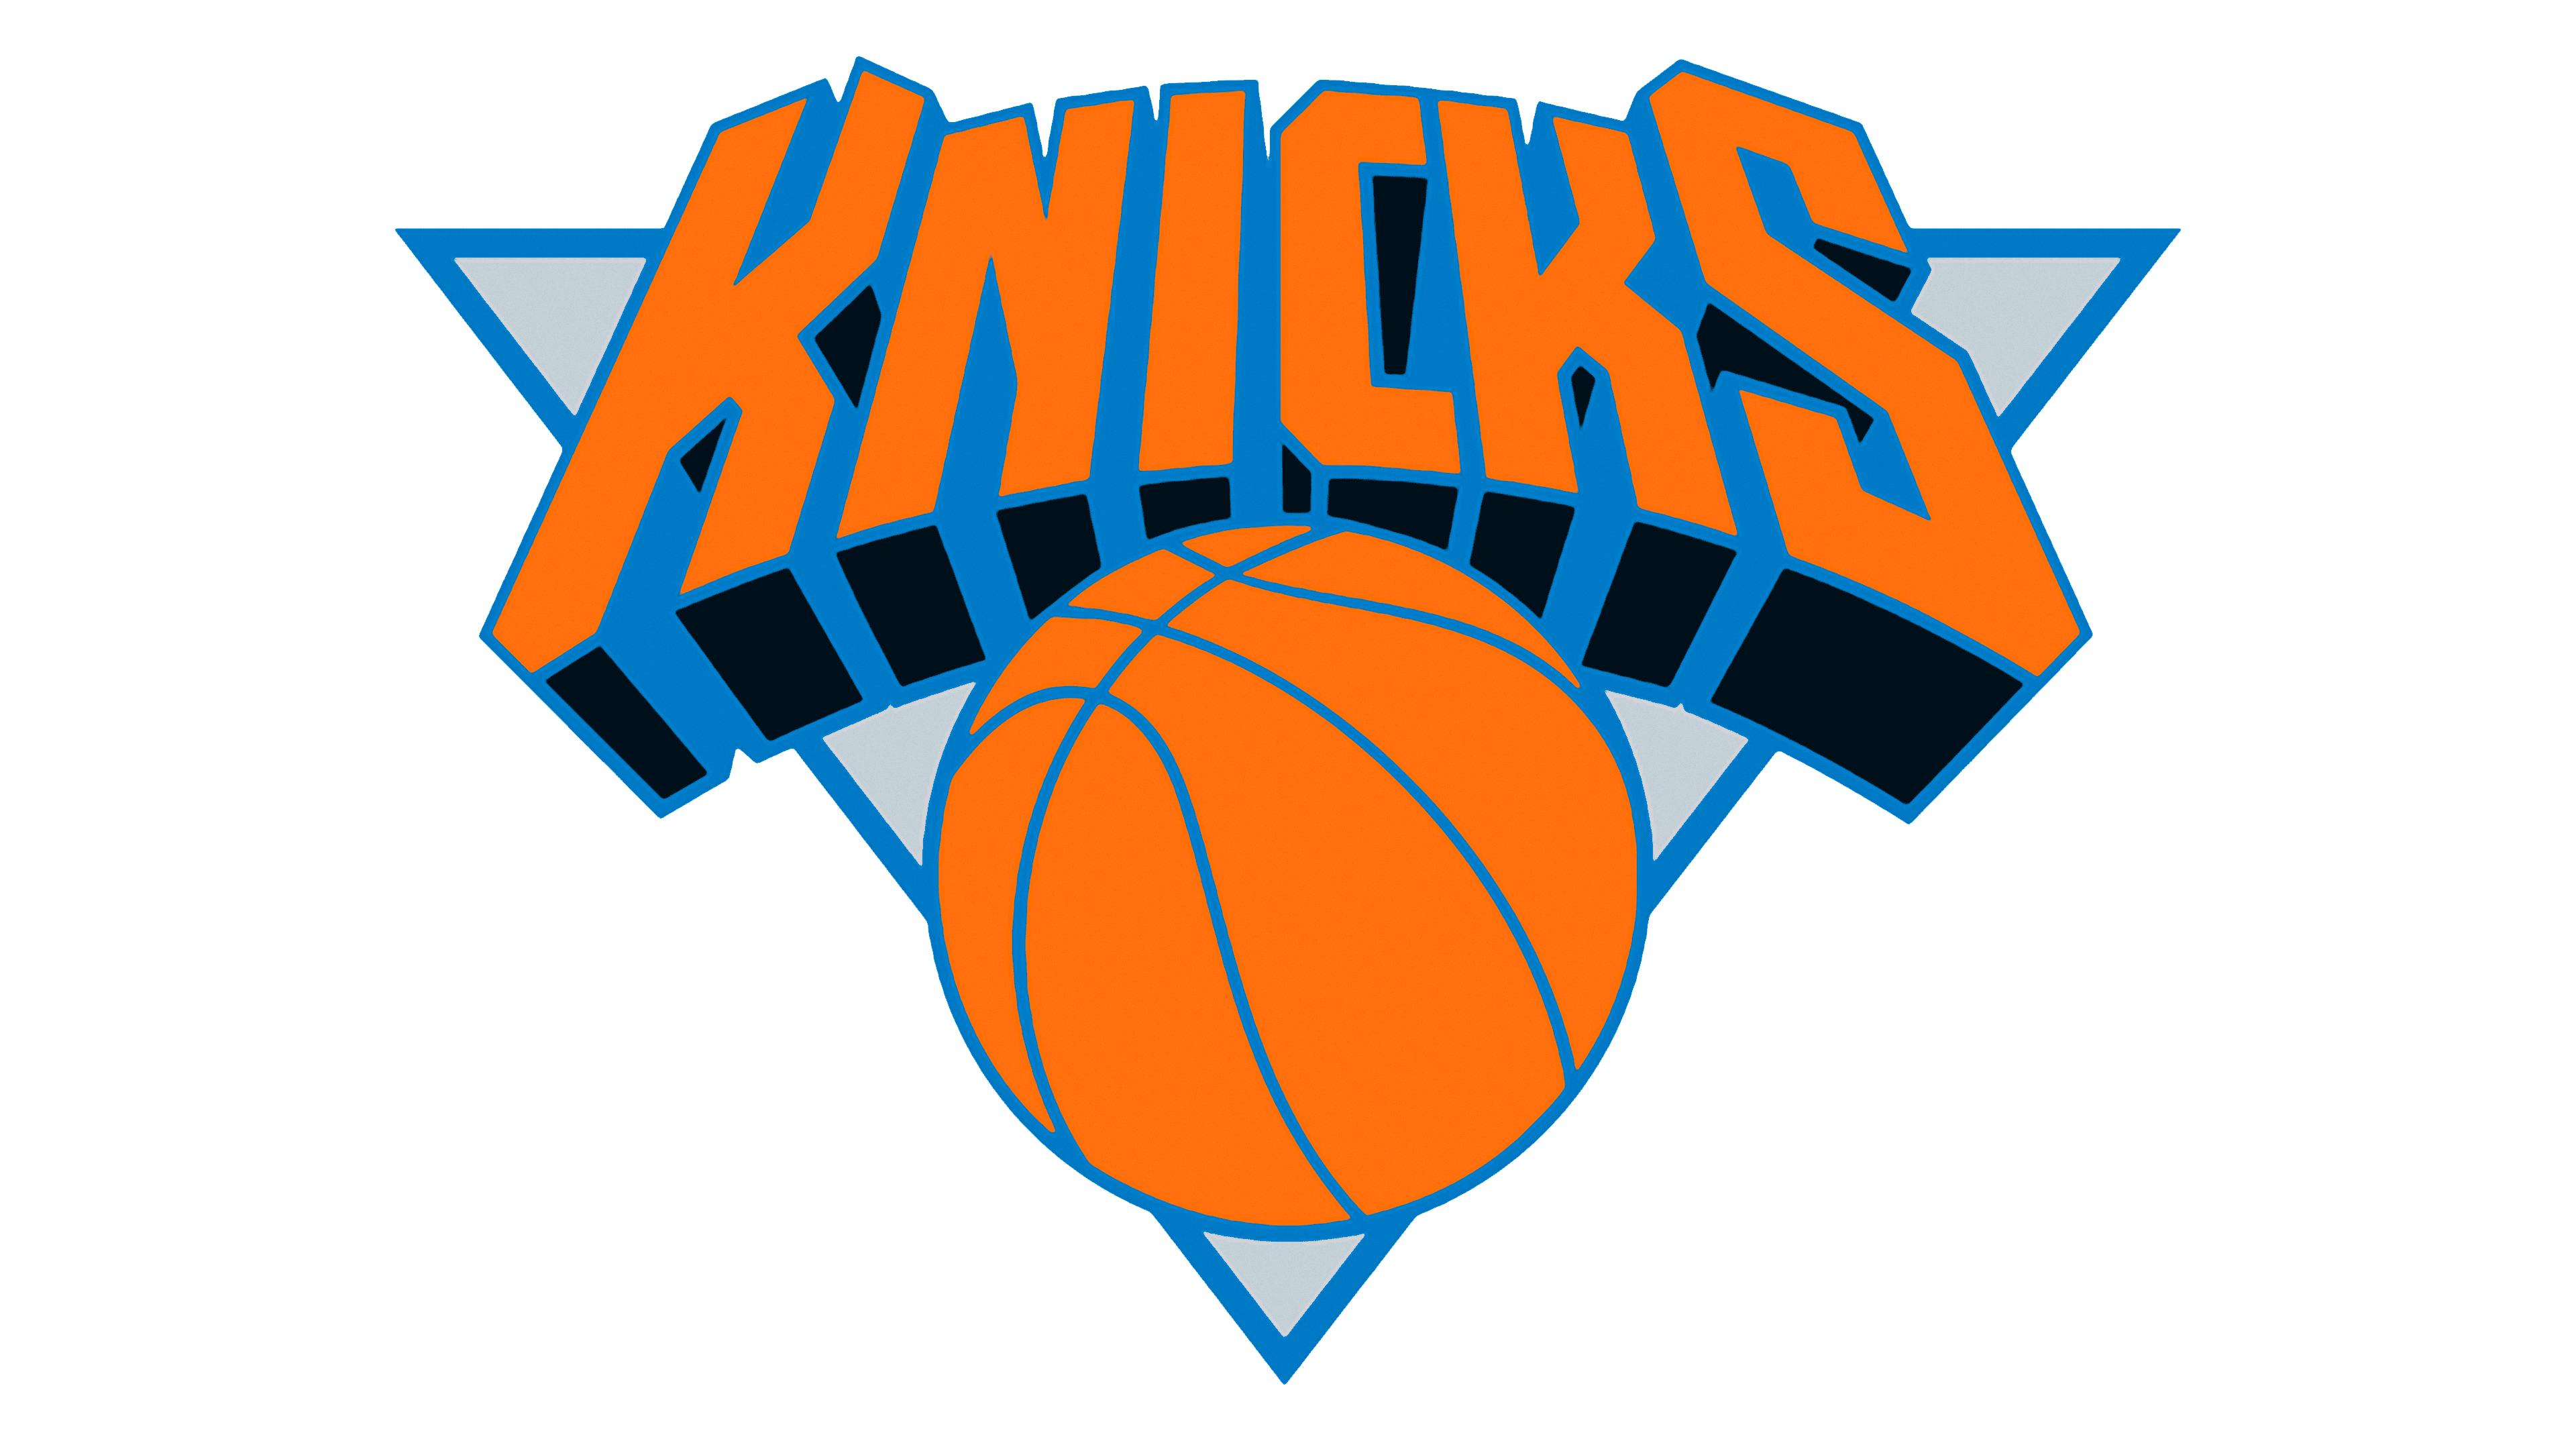 New York Knicks Logo And Symbol Meaning History Sign - vrogue.co